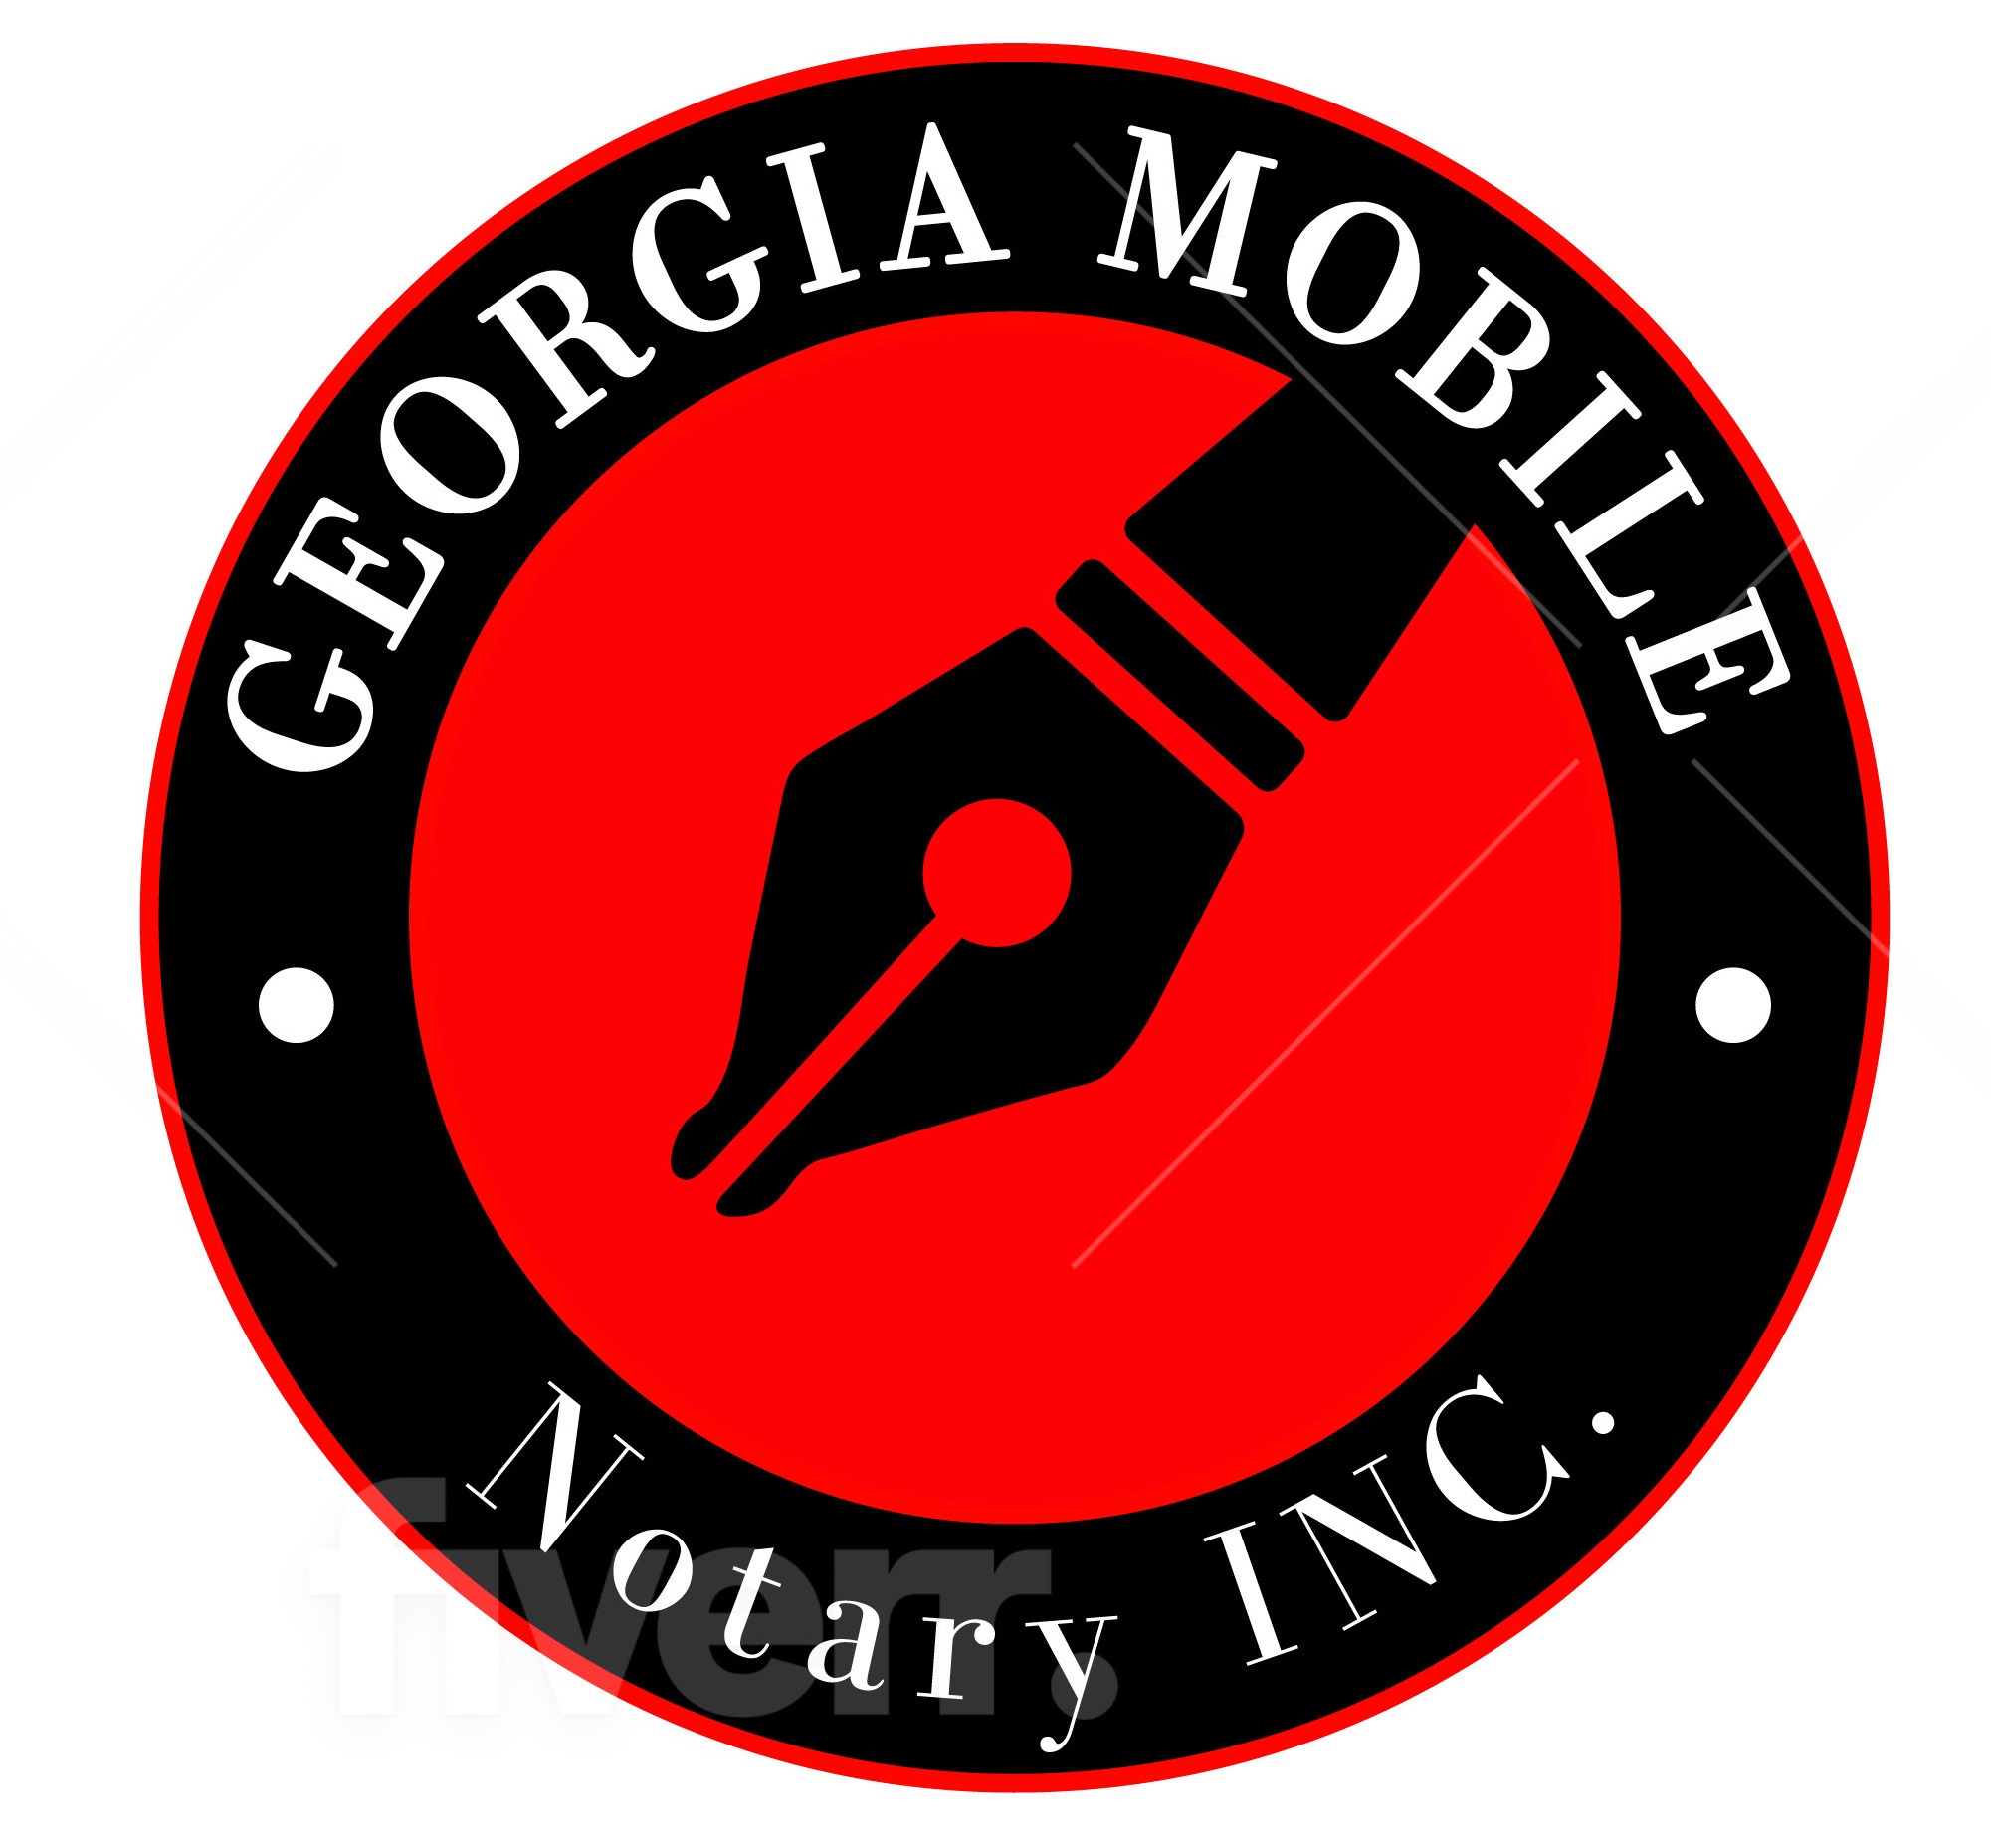 GEOGIA MOBILE NOTARY